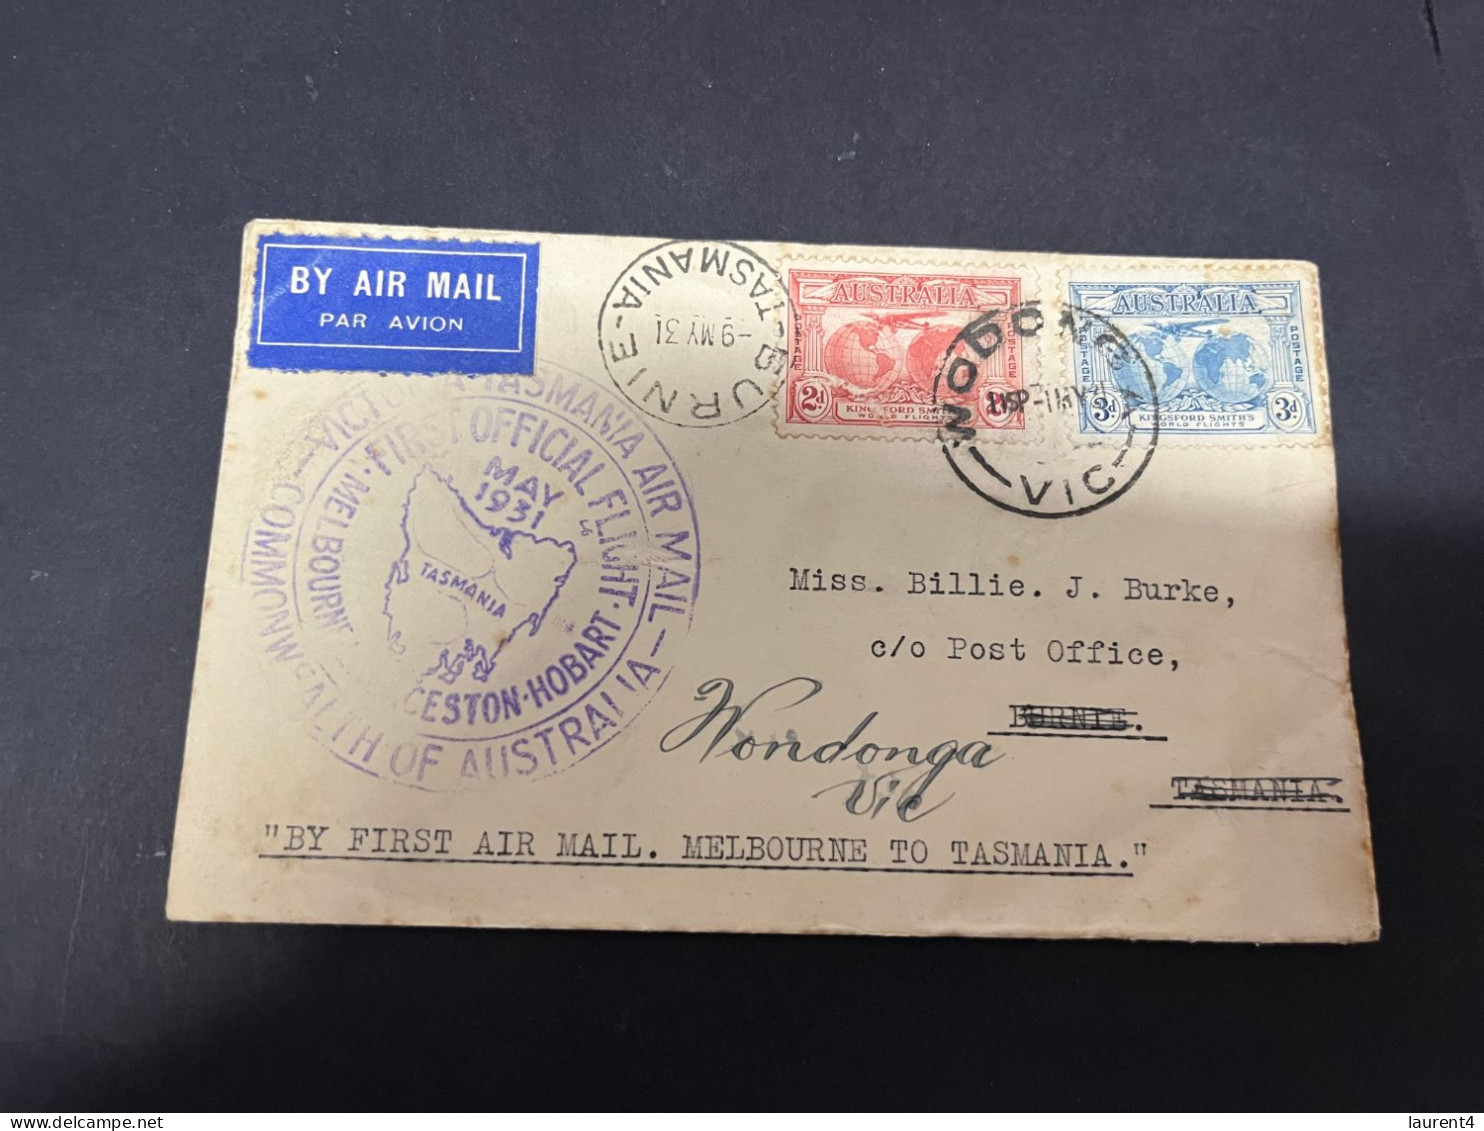 3-3-2024 (2 Y 3) Posted 1931 - First Air Mail From Melbourne To Tasmania (within Australia) - AIR MAIL Letter - Premiers Vols